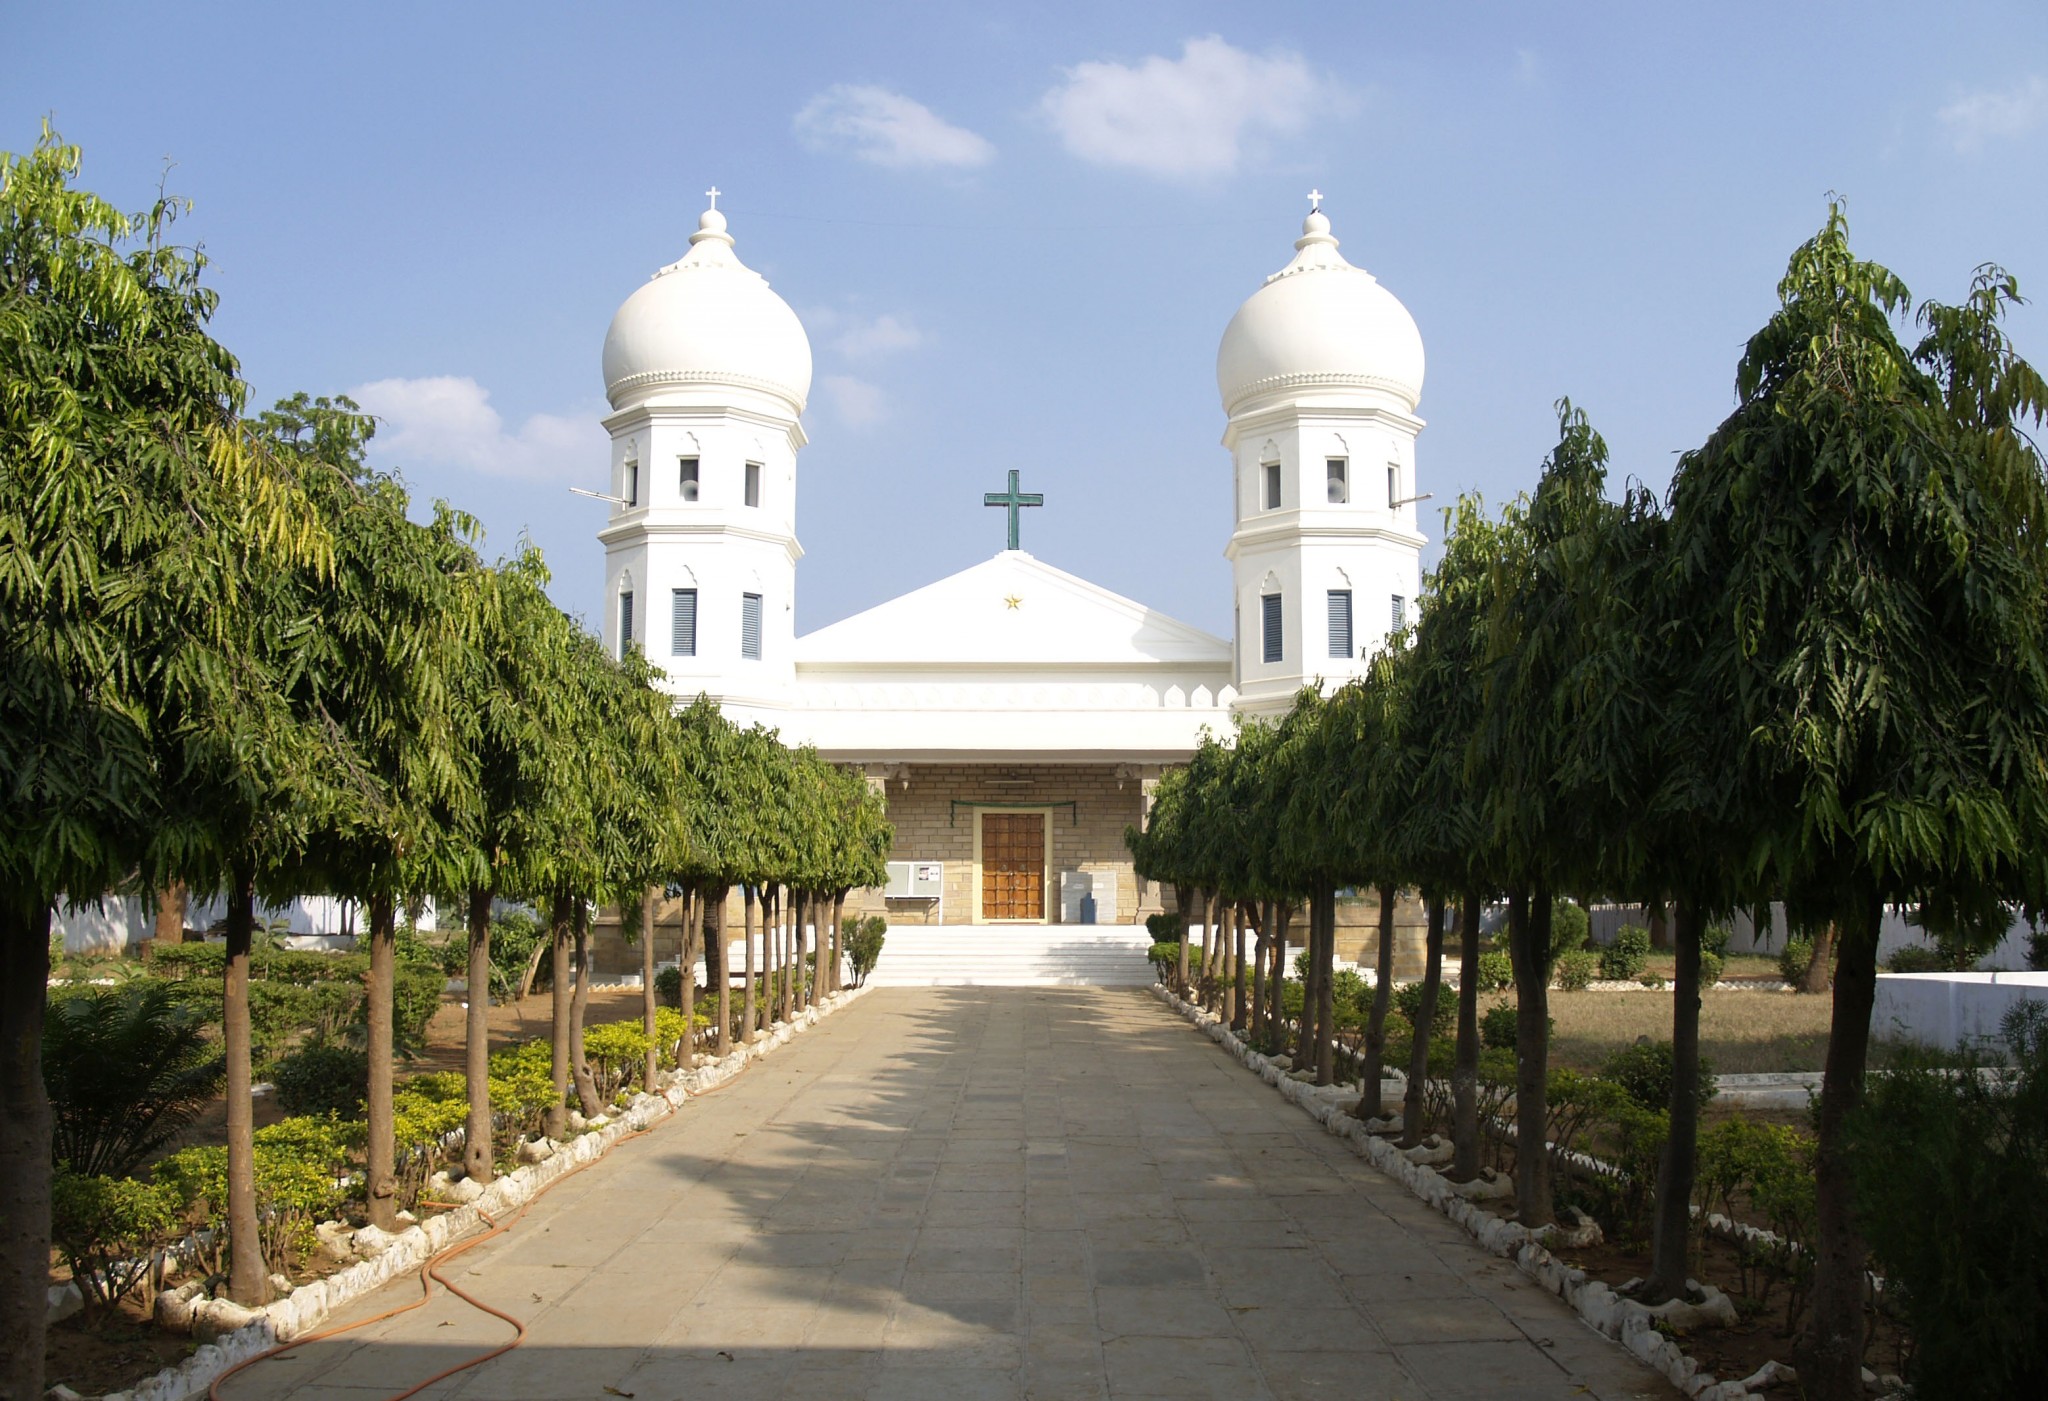 In PICTURES: 33 Most Stunning Churches of India - The Better India